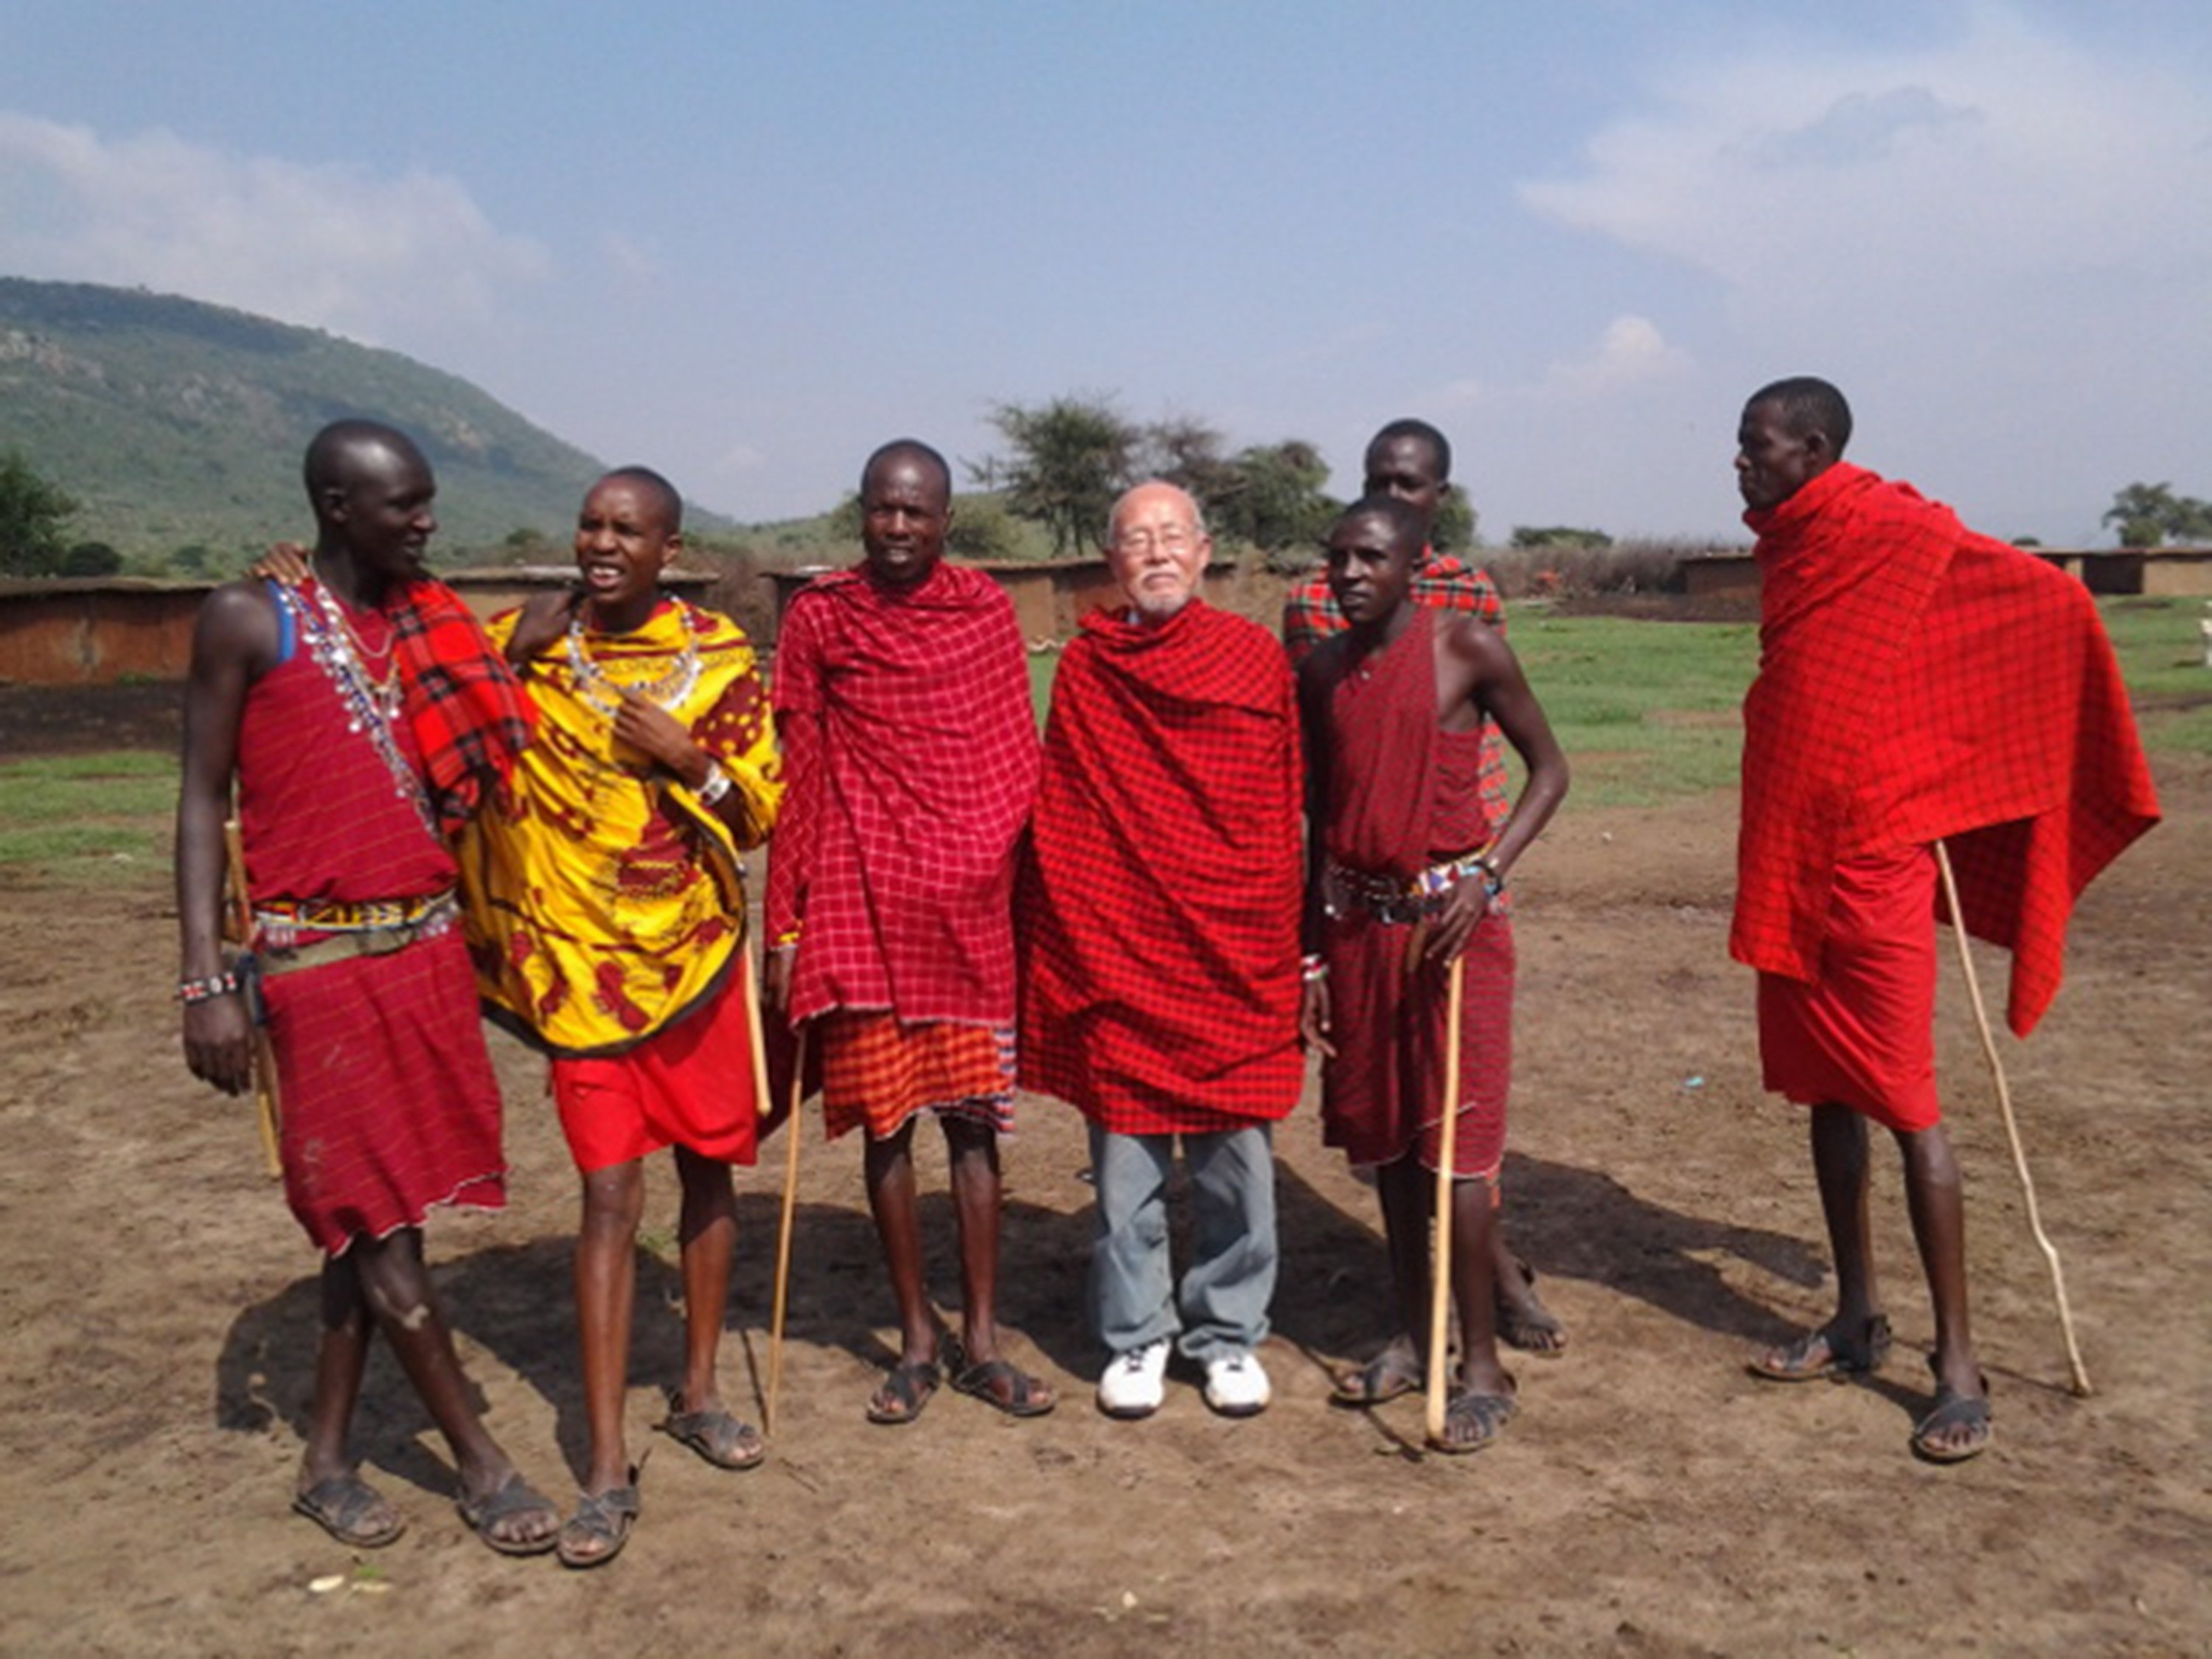 Unlike millennial backpackers, 76-year-old Hyo So commits things to memory rather than snapping photos on his travels. The only photos he has are ones other travellers take of or with him and e-mail him, like this from with Maasai tribesmen in Kenya. Photos: TNS